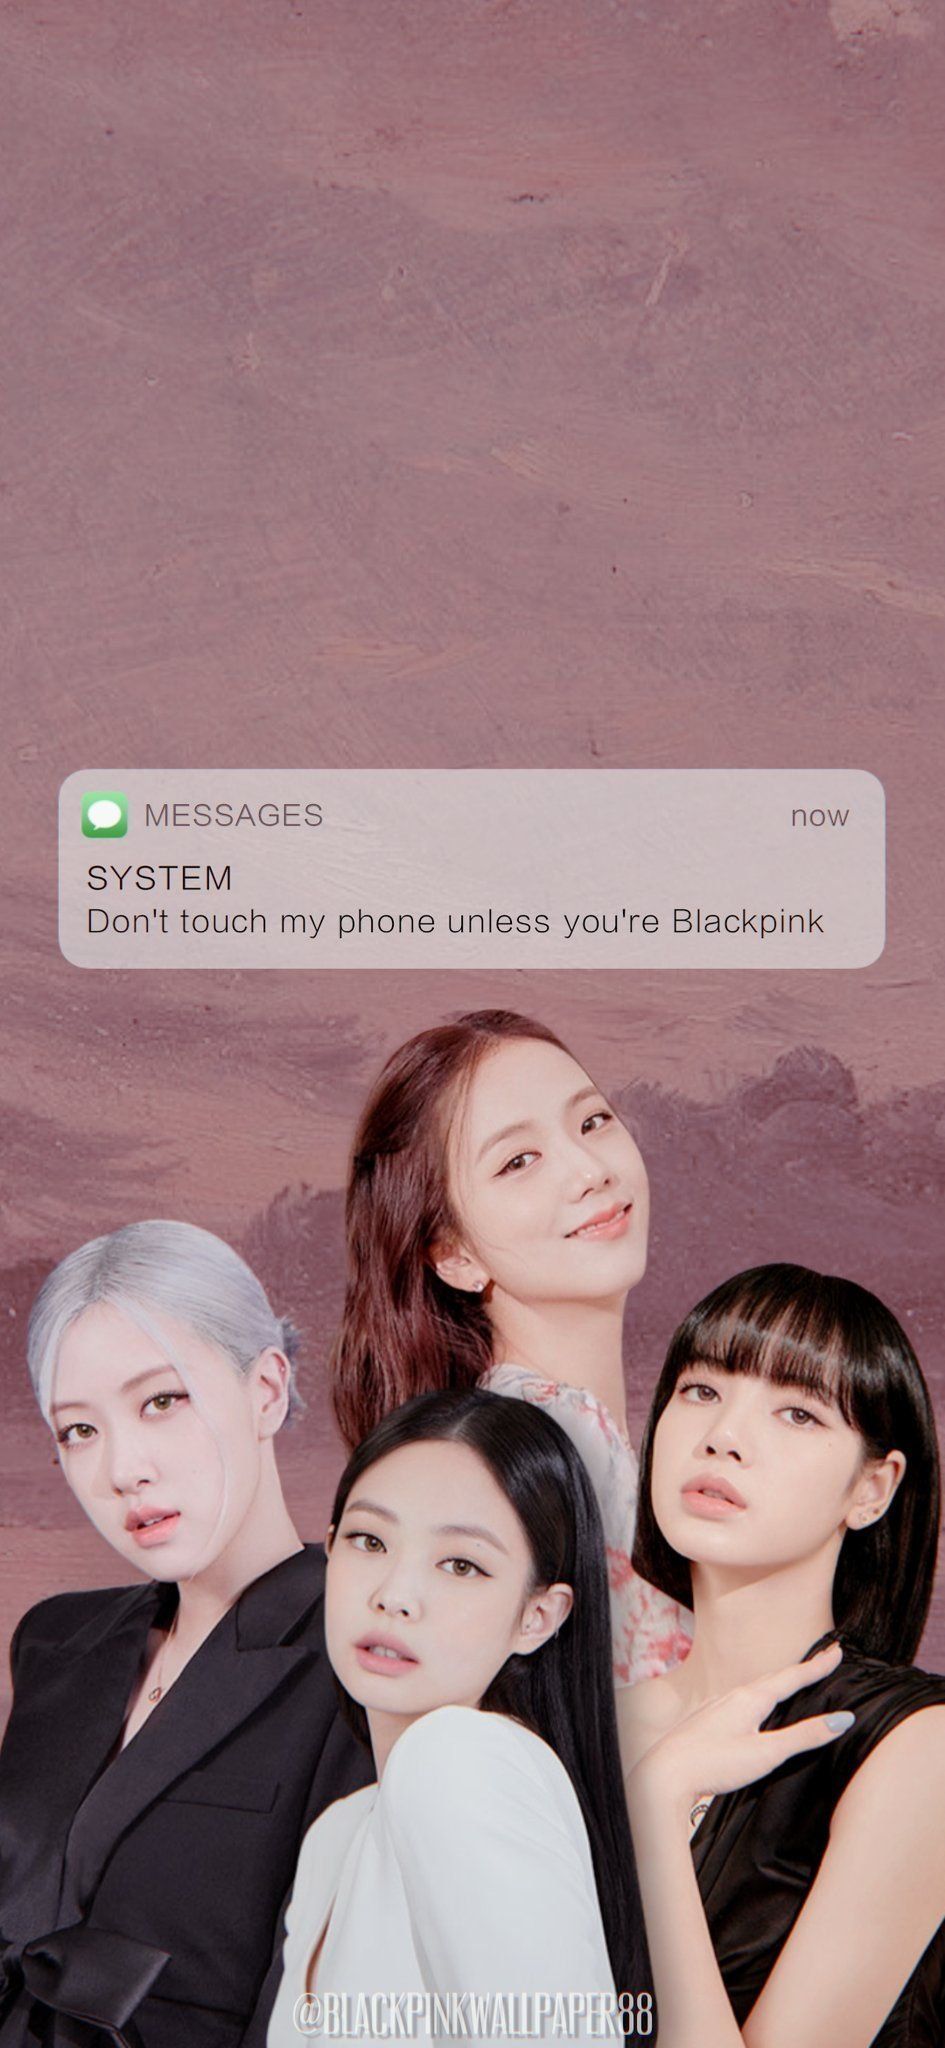 Aesthetic Blackpink Wallpaper Iphone 85 Images In 2020 Blackpink Wallpaper Blackpink Blackpink Kpop - BLACKPINK